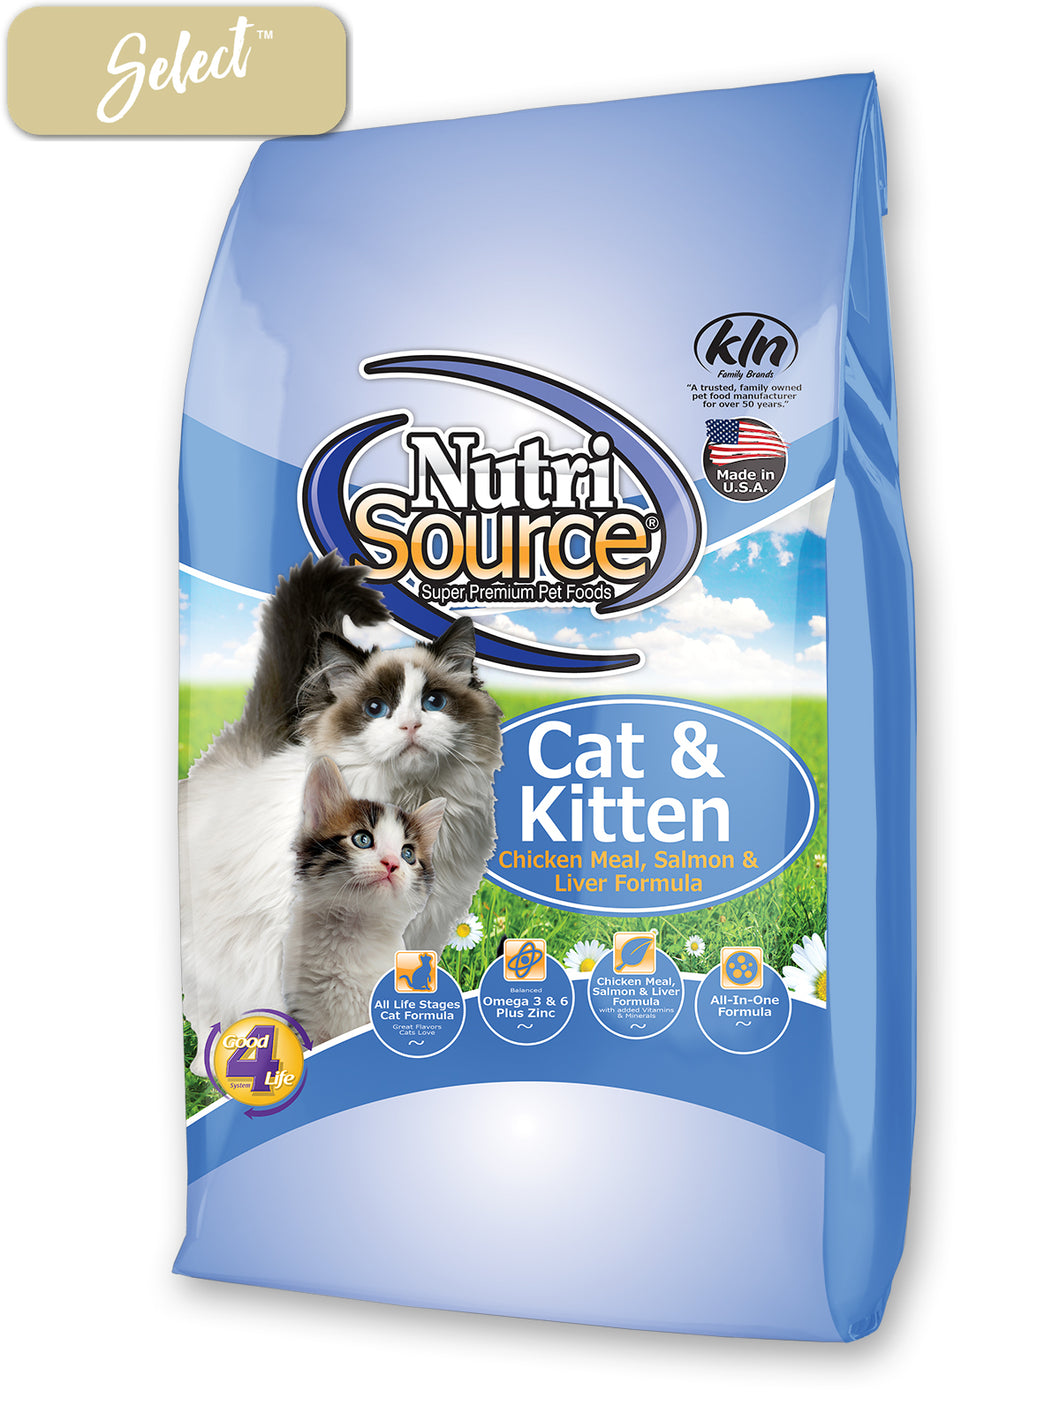 Nutrisource Cat and Kitten Chicken, Salmon Liver Cat Food